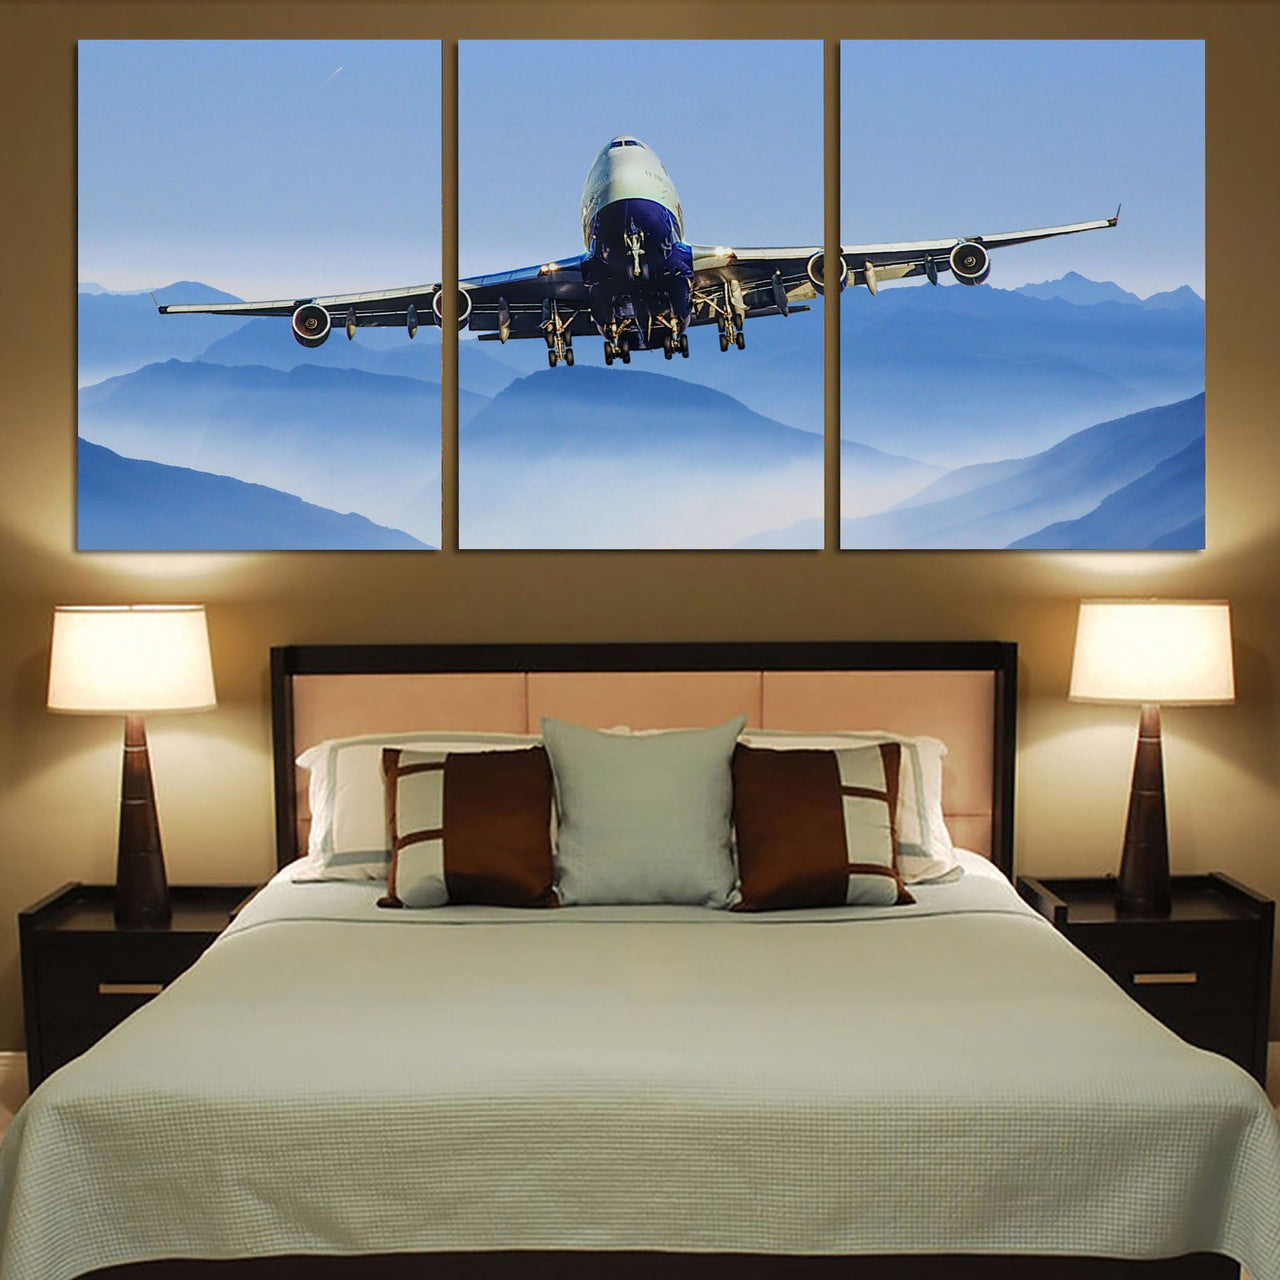 Landing Boeing 747 From Front Printed Canvas Posters (3 Pieces) Aviation Shop 